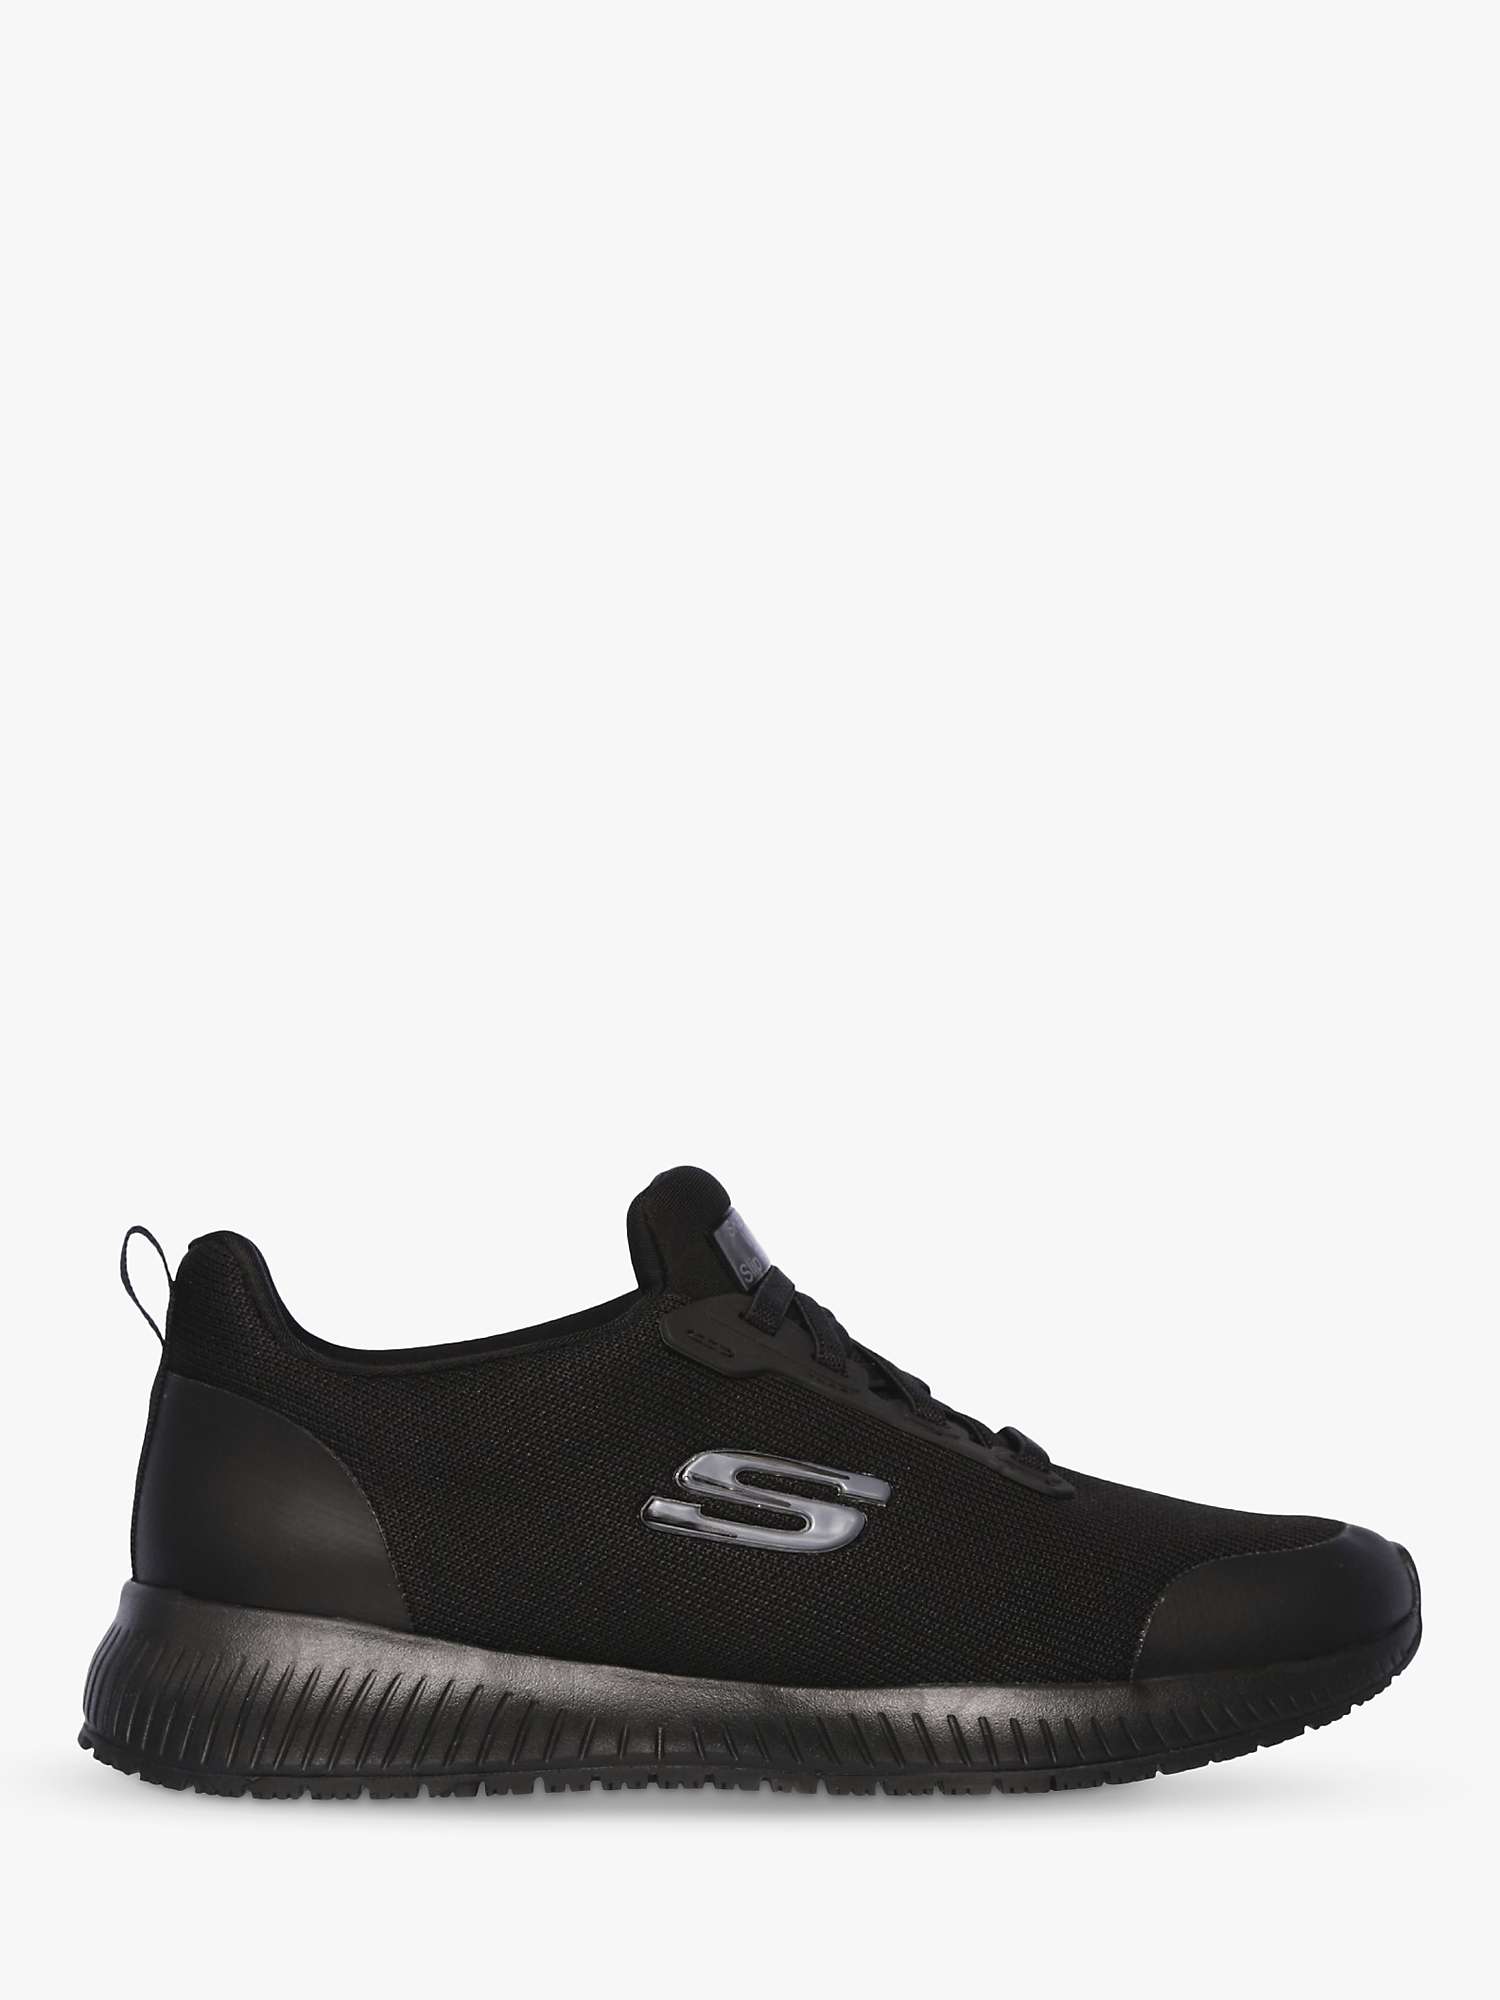 Buy Skechers Squad SR Lace Up Trainers Online at johnlewis.com